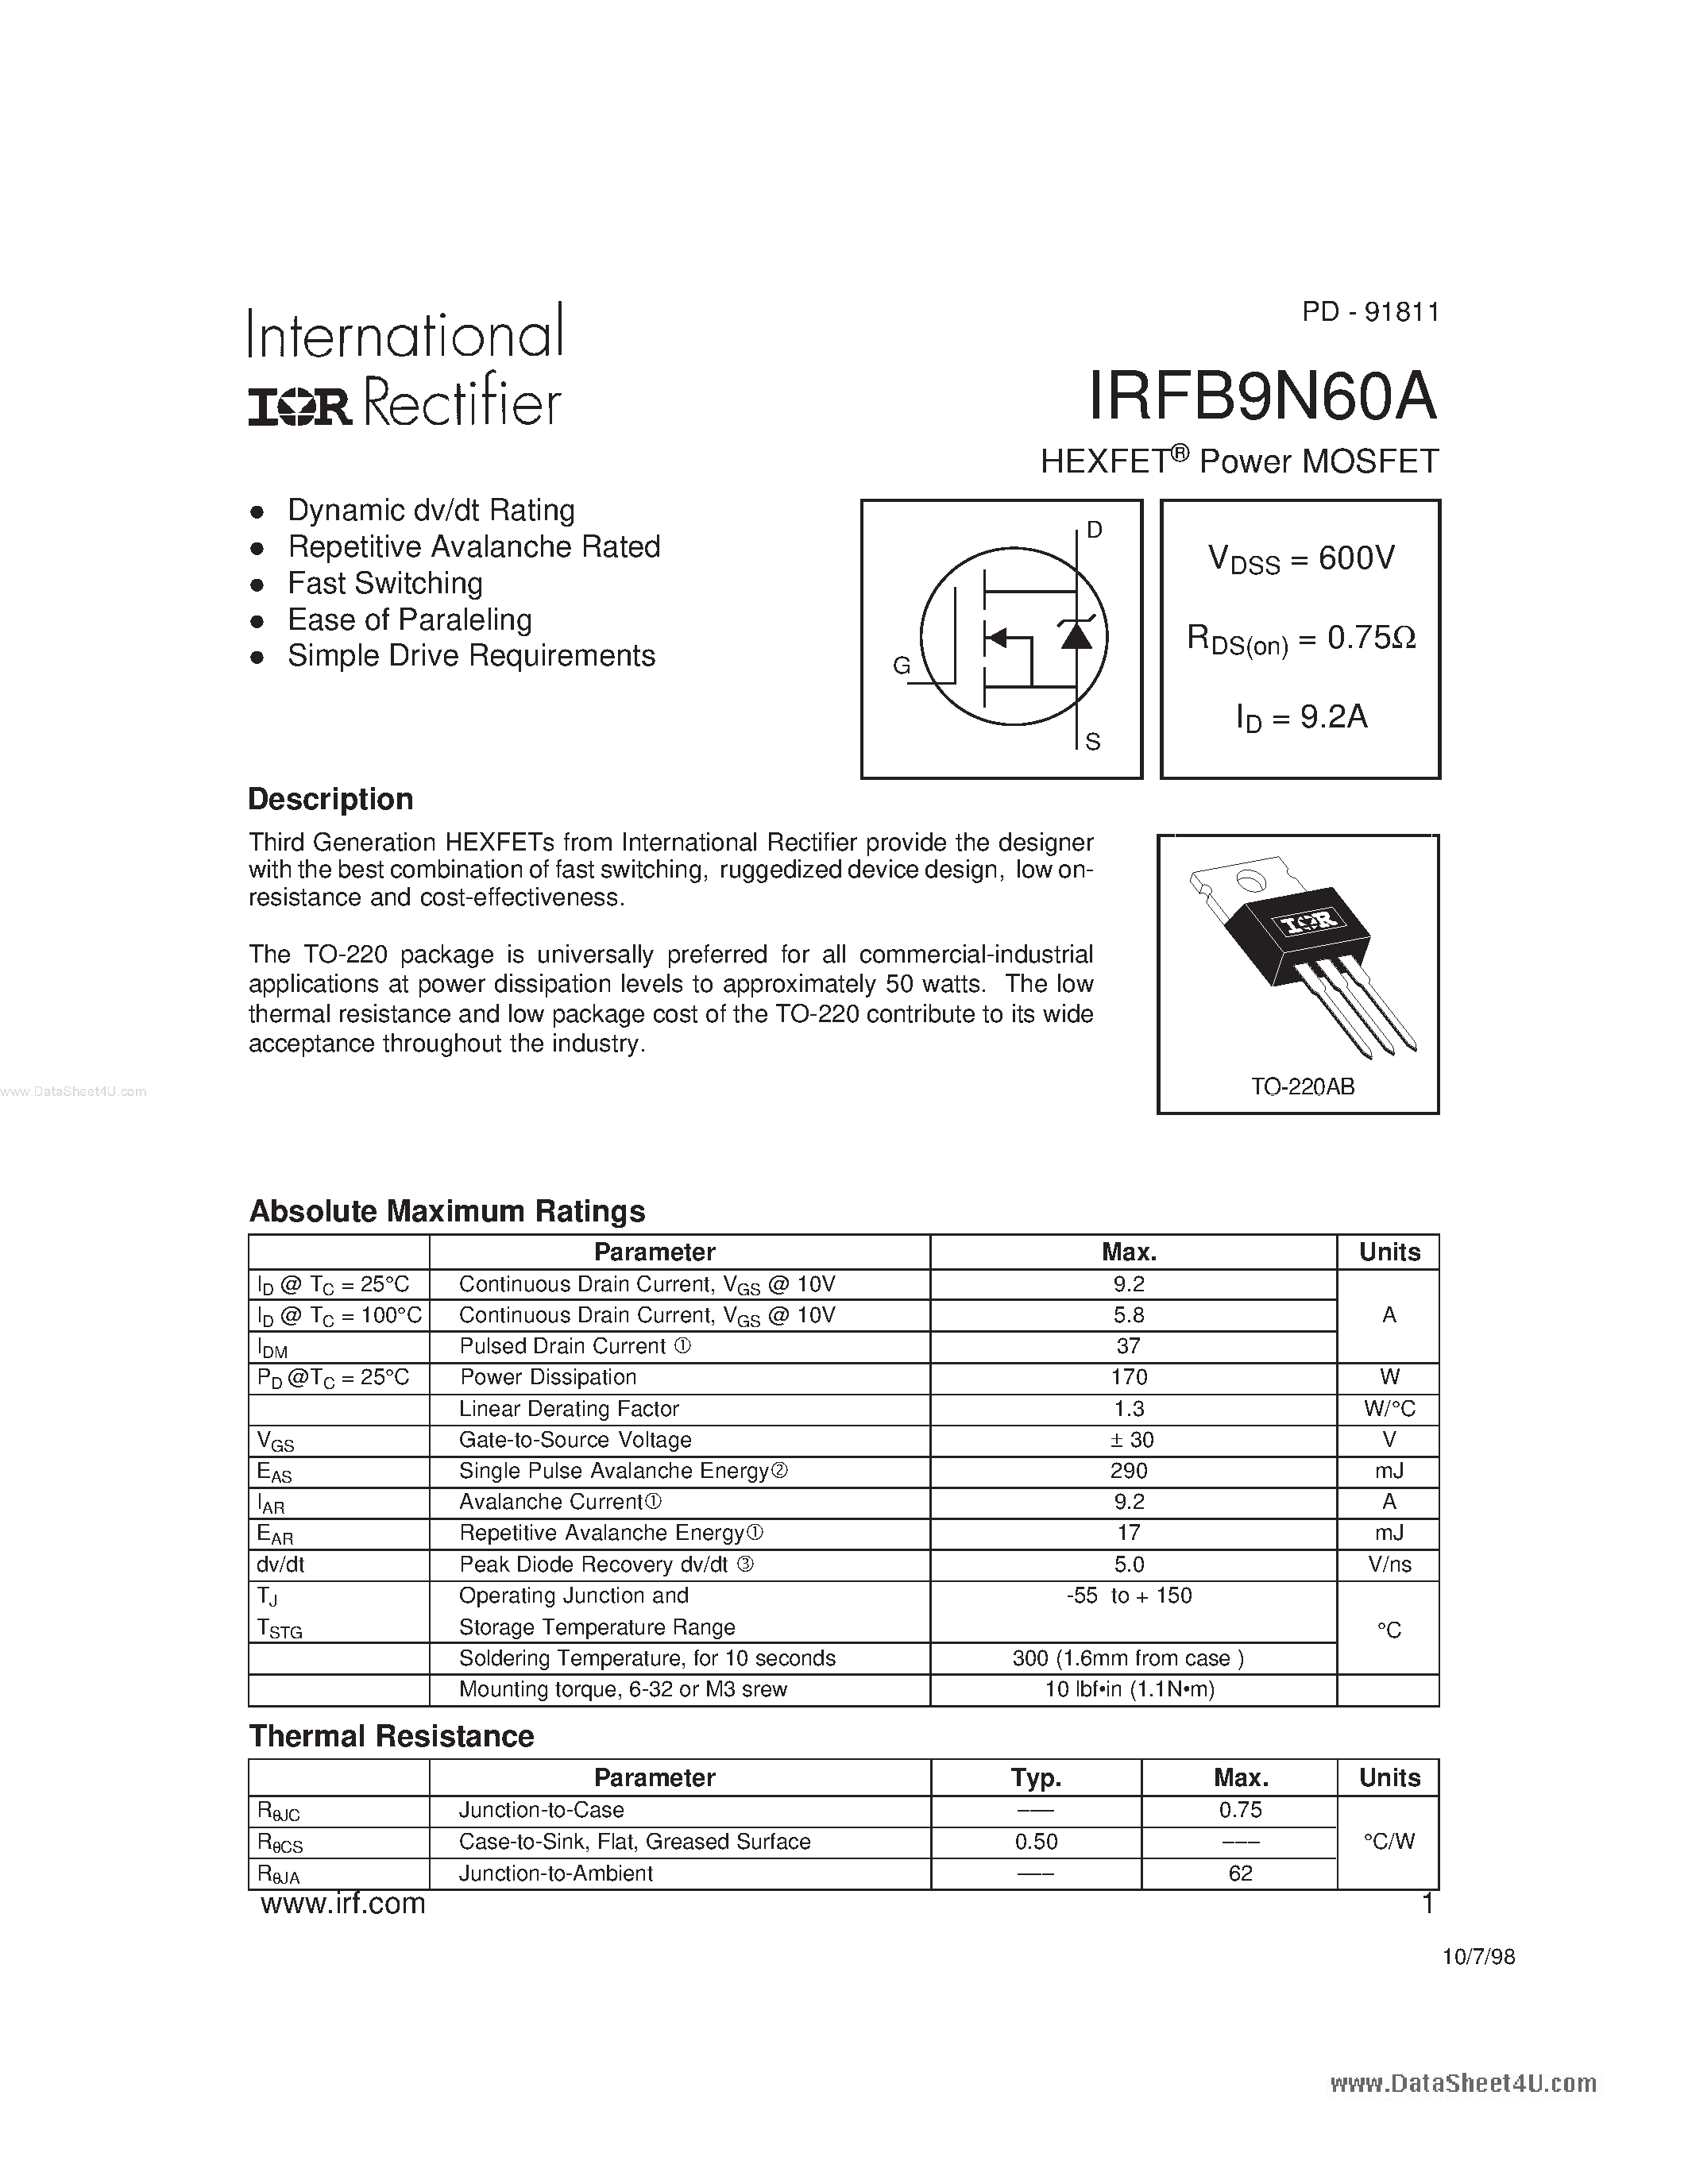 Datasheet FB9N60A - Search -----> IRFB9N60A page 1